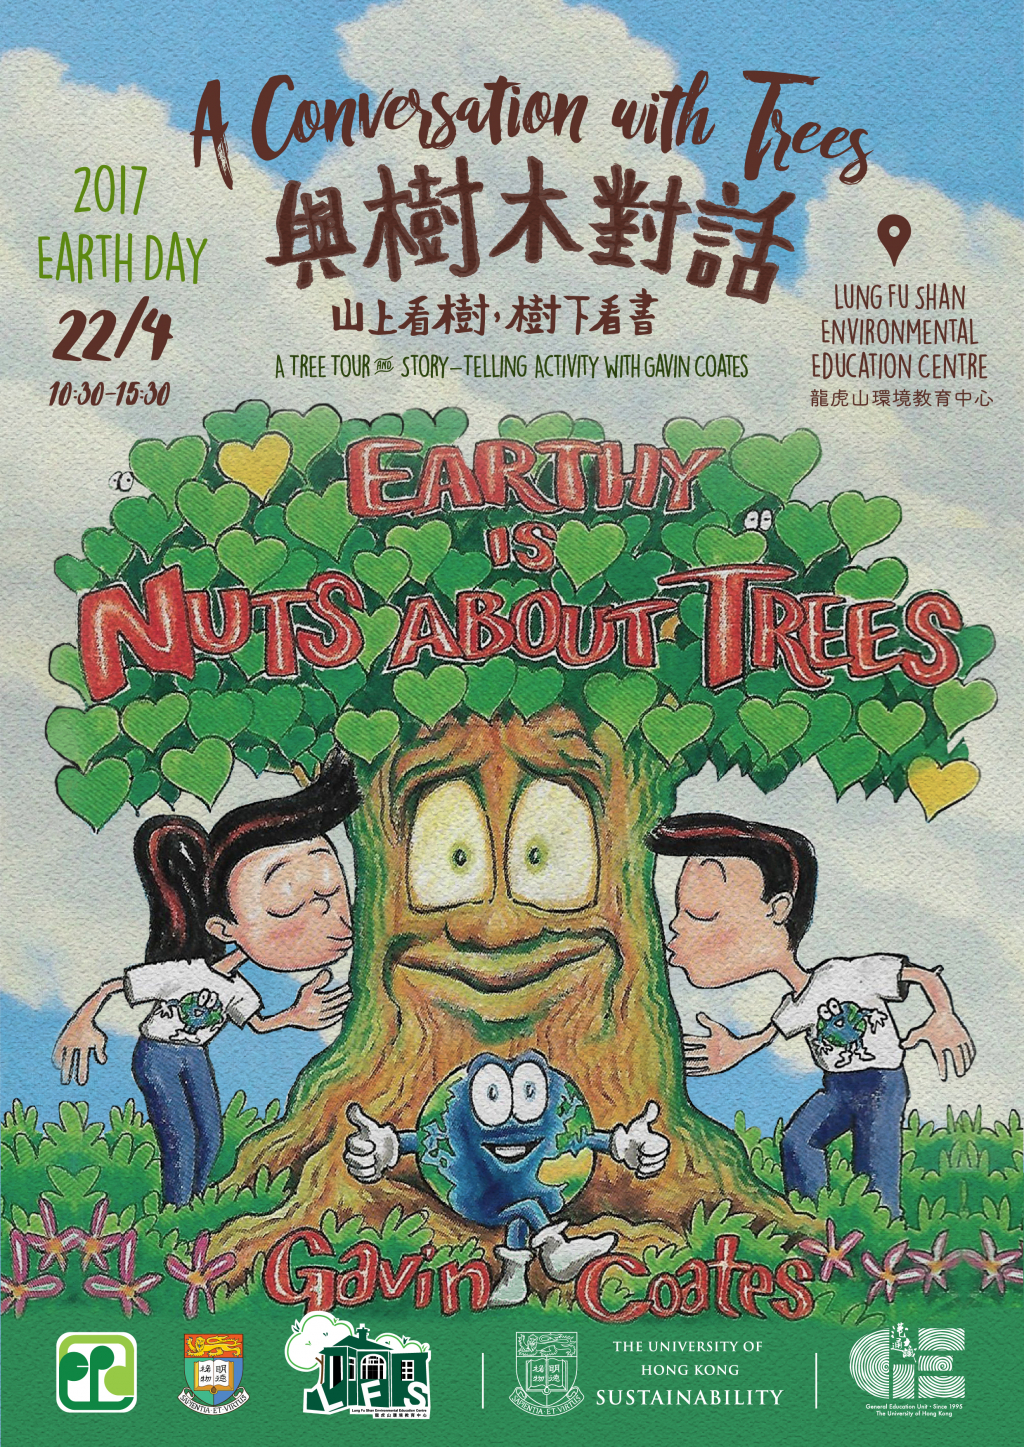 Apr 22- Celebrate Earth Day with trees!